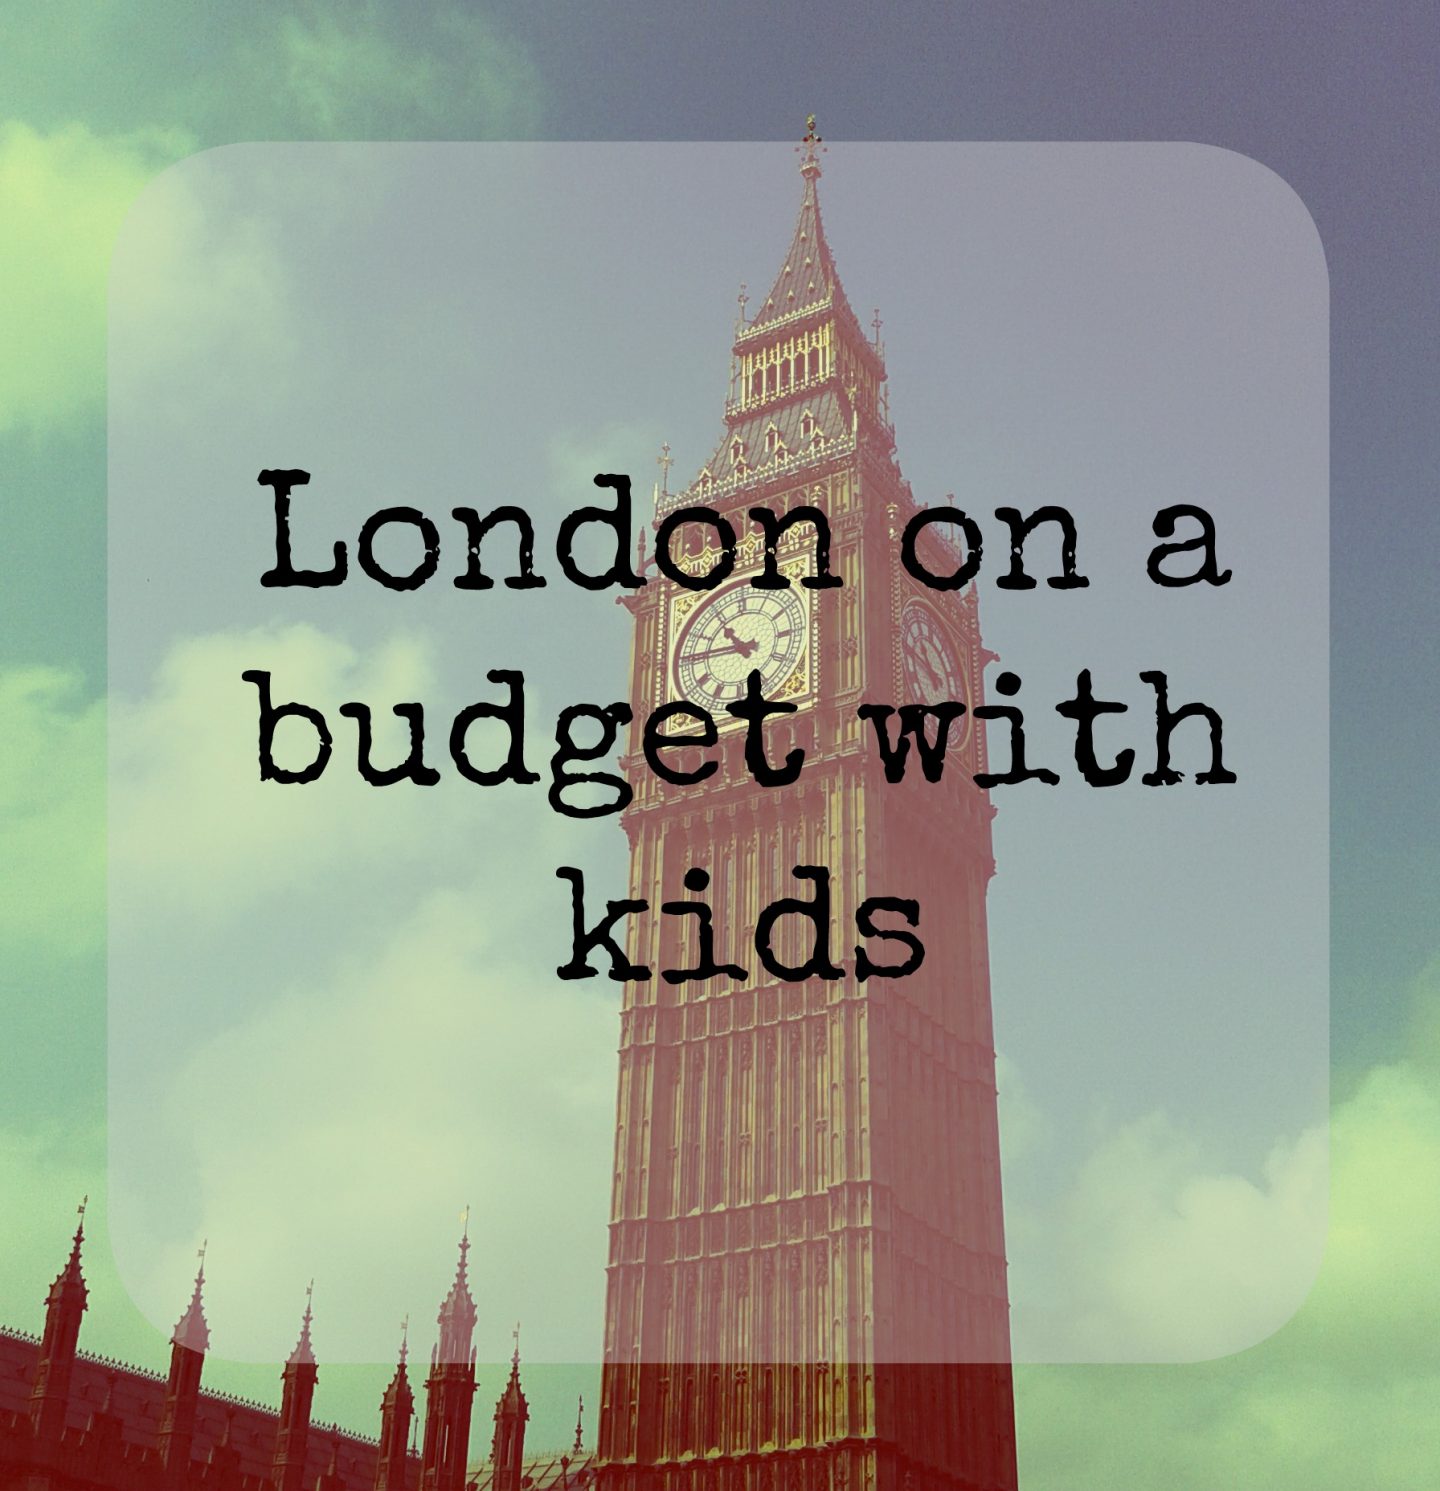 London on a budget with kids